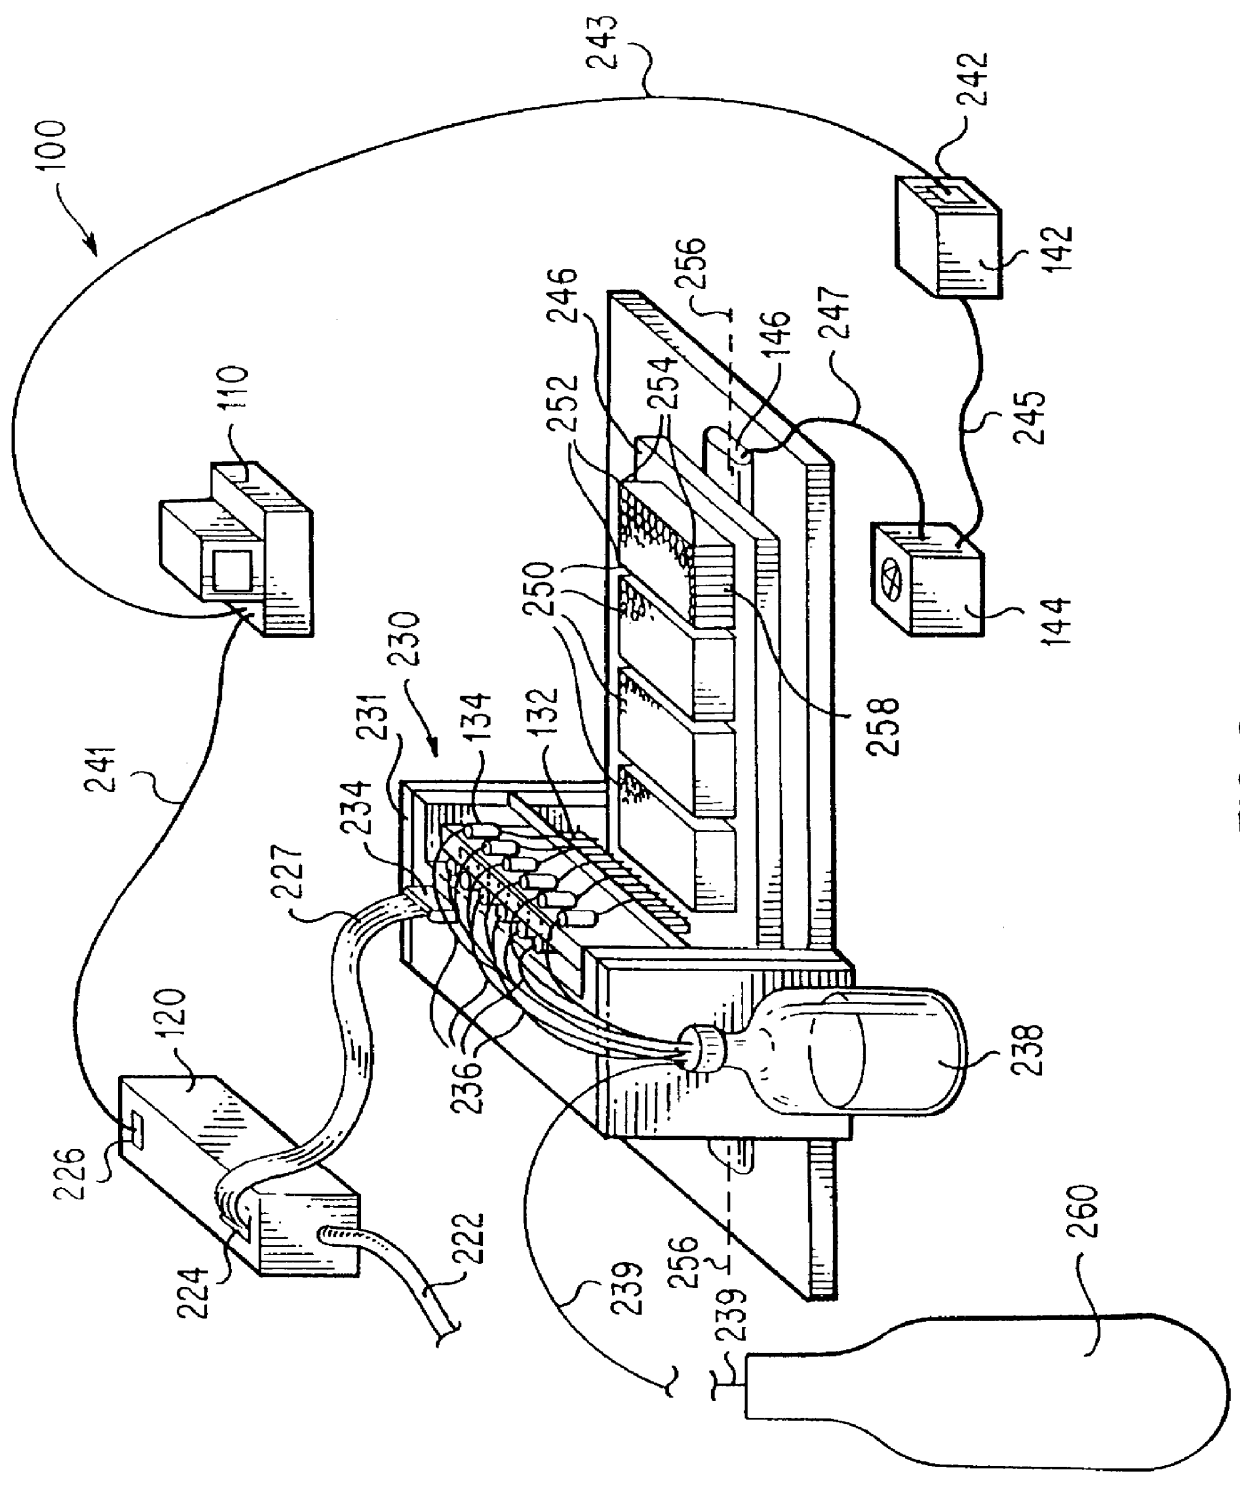 Method and apparatus for automated dispensing